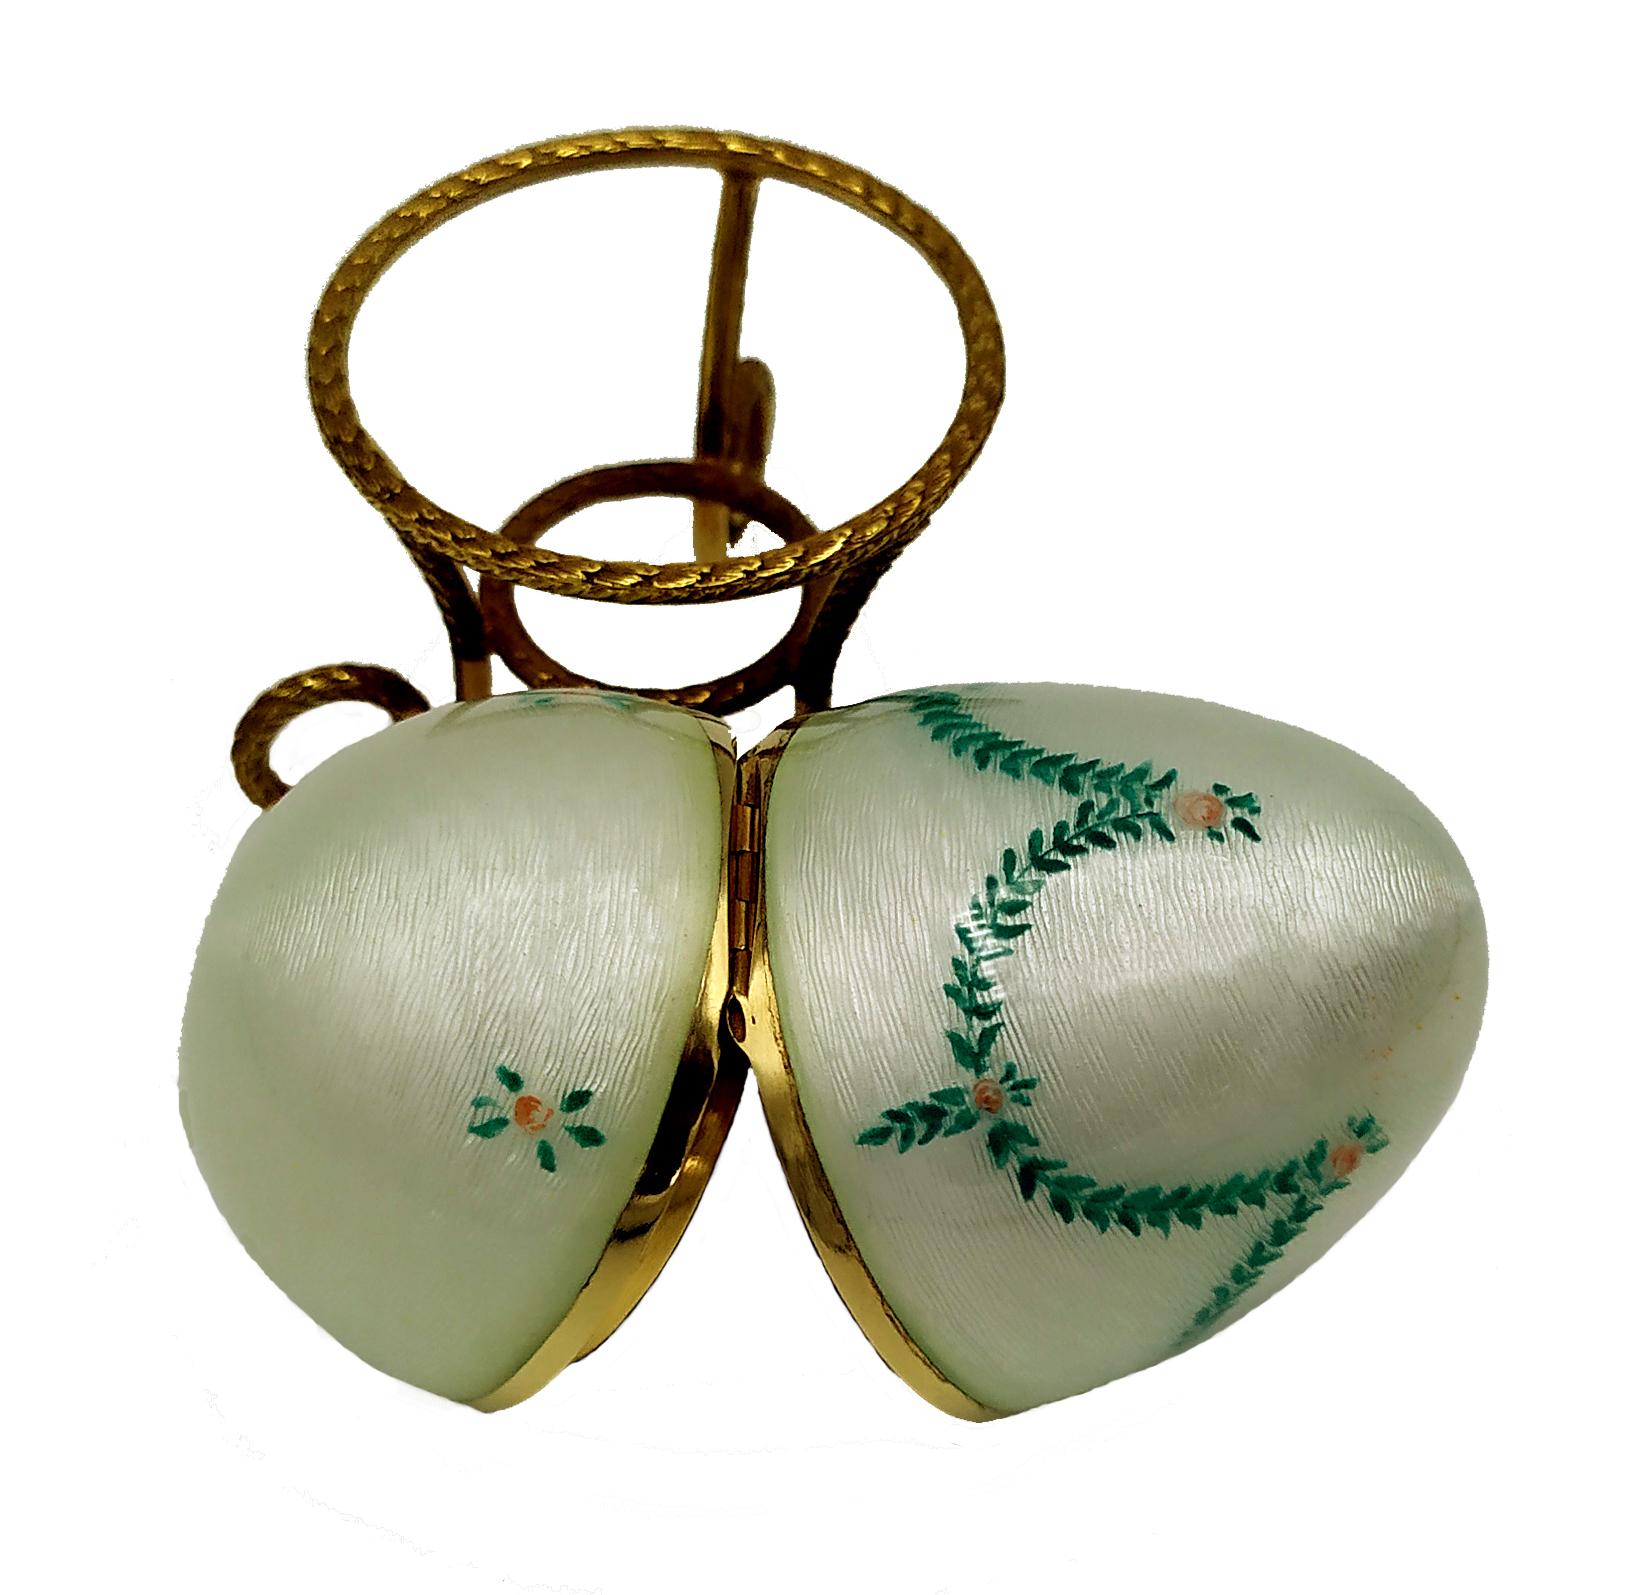 Egg in 925/1000 sterling silver gold plated with translucent fired enamel on guilloché with miniatures of hand-painted floral garlands resting on tripod. Viennese Art Nouveau style second half of the 19th century. Egg diameter cm. 5 cm high. 7,